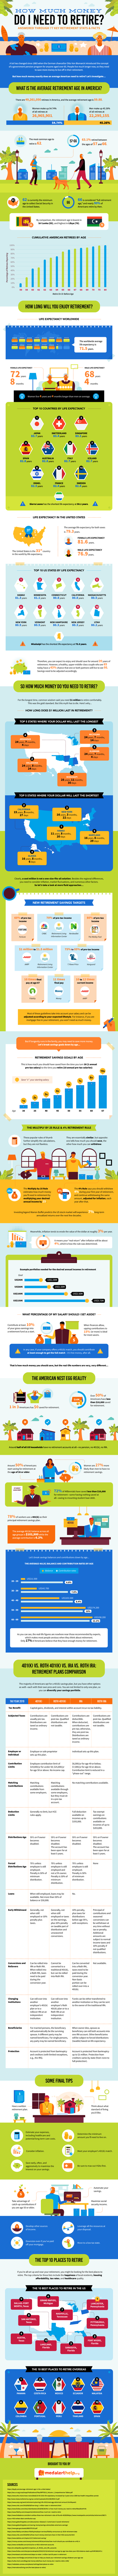 How Much Money Do I Need to Retire (Infographic)